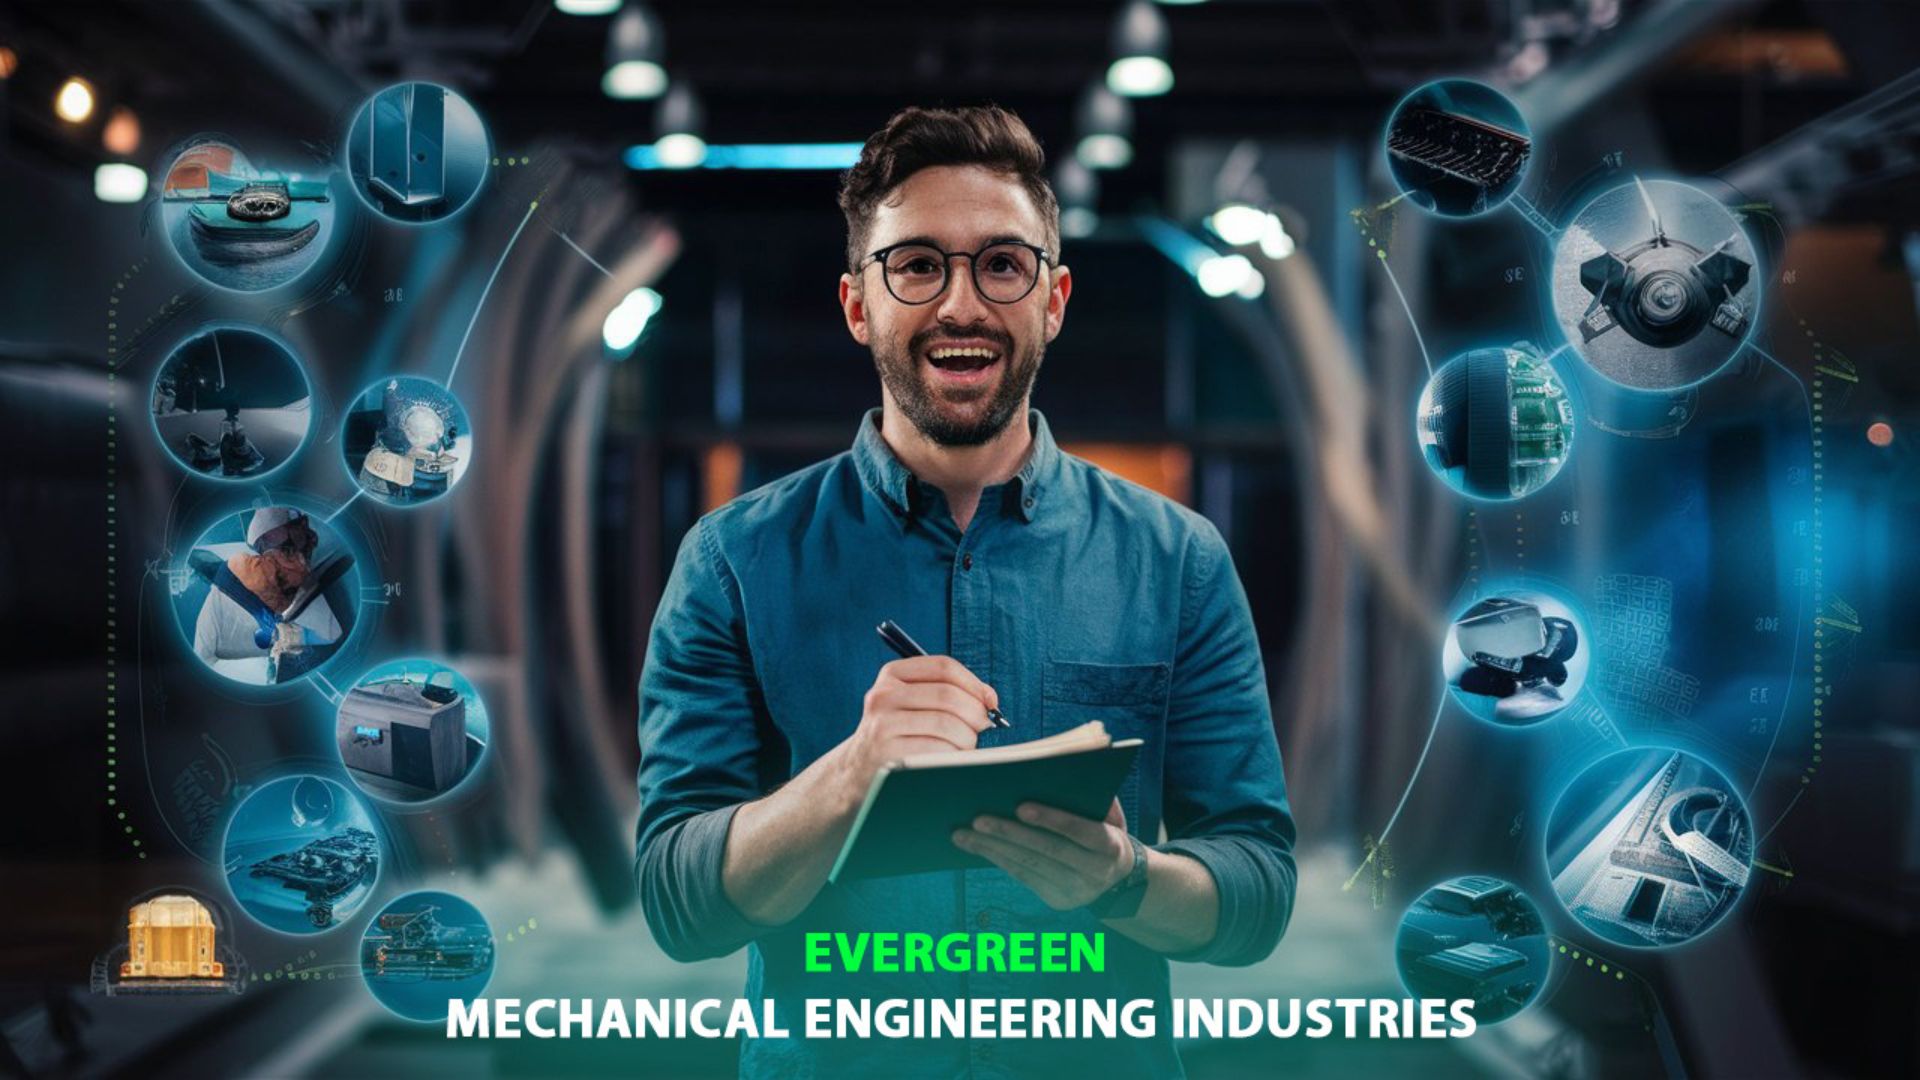 Top 10 Mechanical Engineering Industries for Your Dream Career!